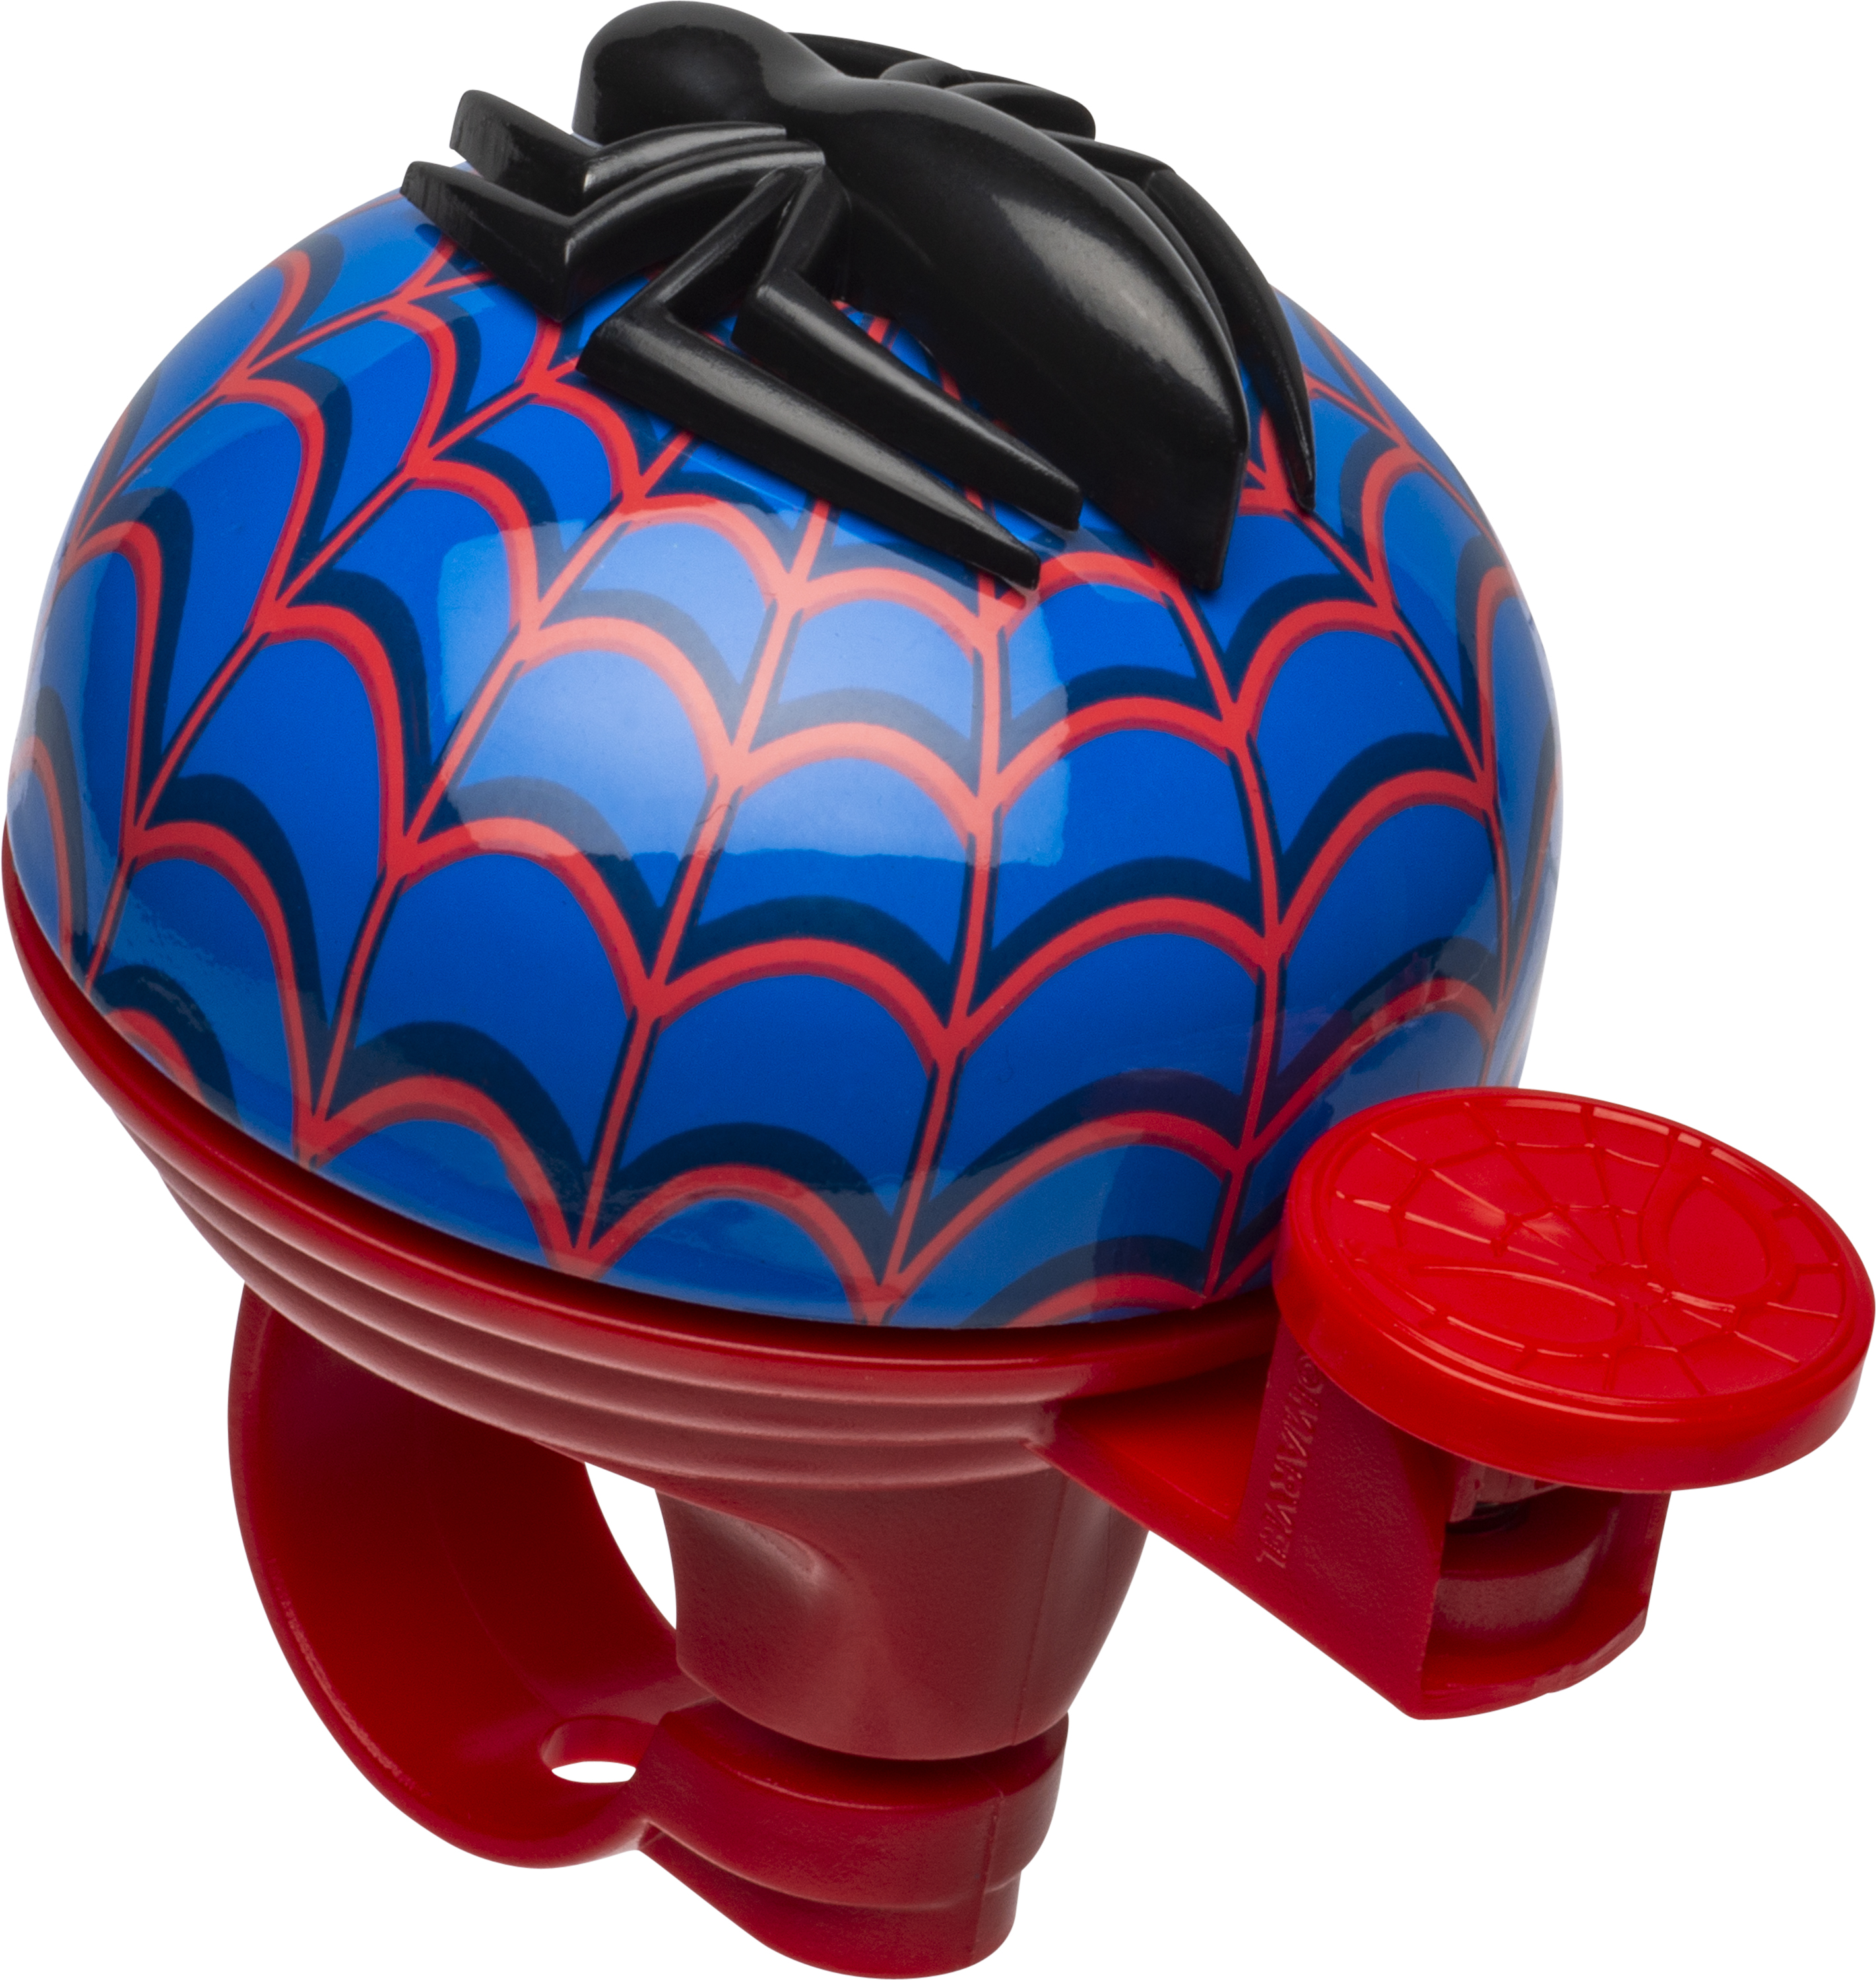 Bell Spiderman Elbow & Knee Pad Set with Bike Bell Value Pack - image 2 of 5